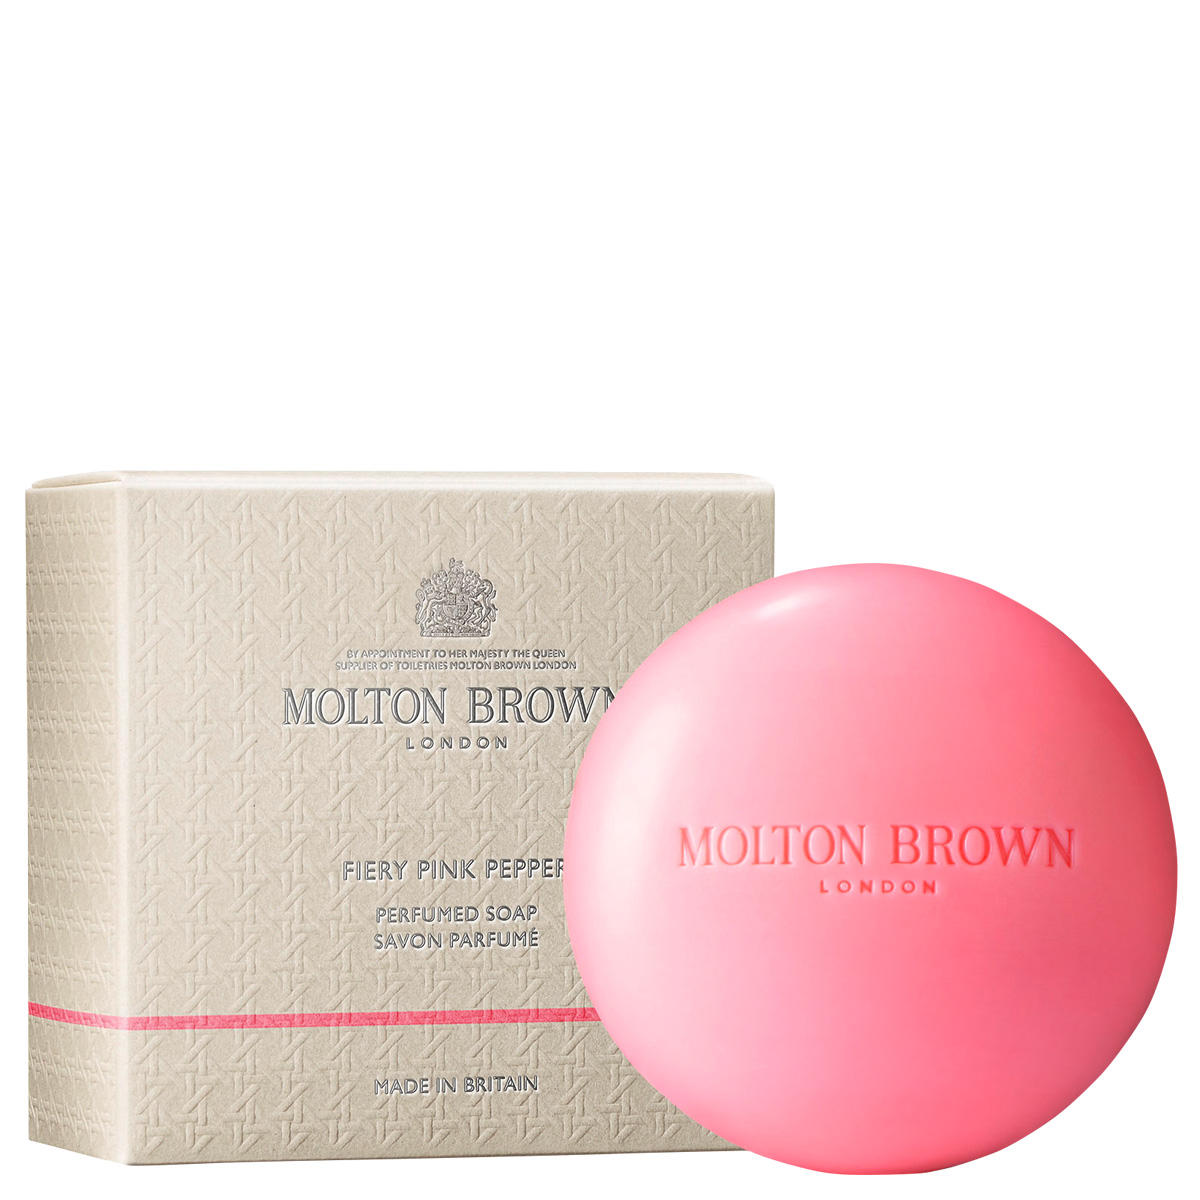 MOLTON BROWN Fiery Pink Pepper Perfumed Soap 150 g - 3